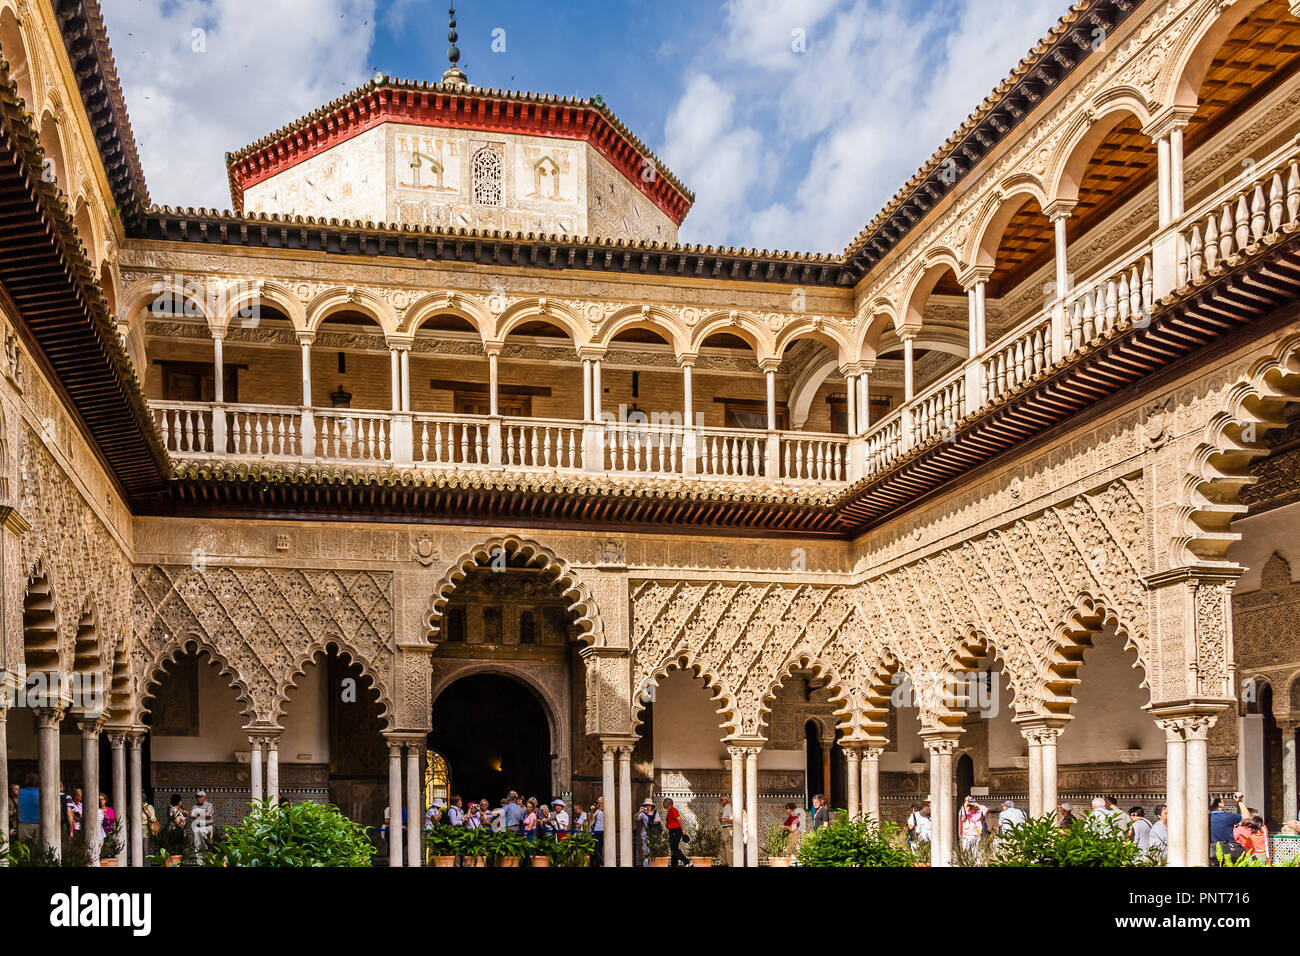 View of the arches int the inner courtyard of the Reales Alcazares, Seville, Spain. Stock Photo